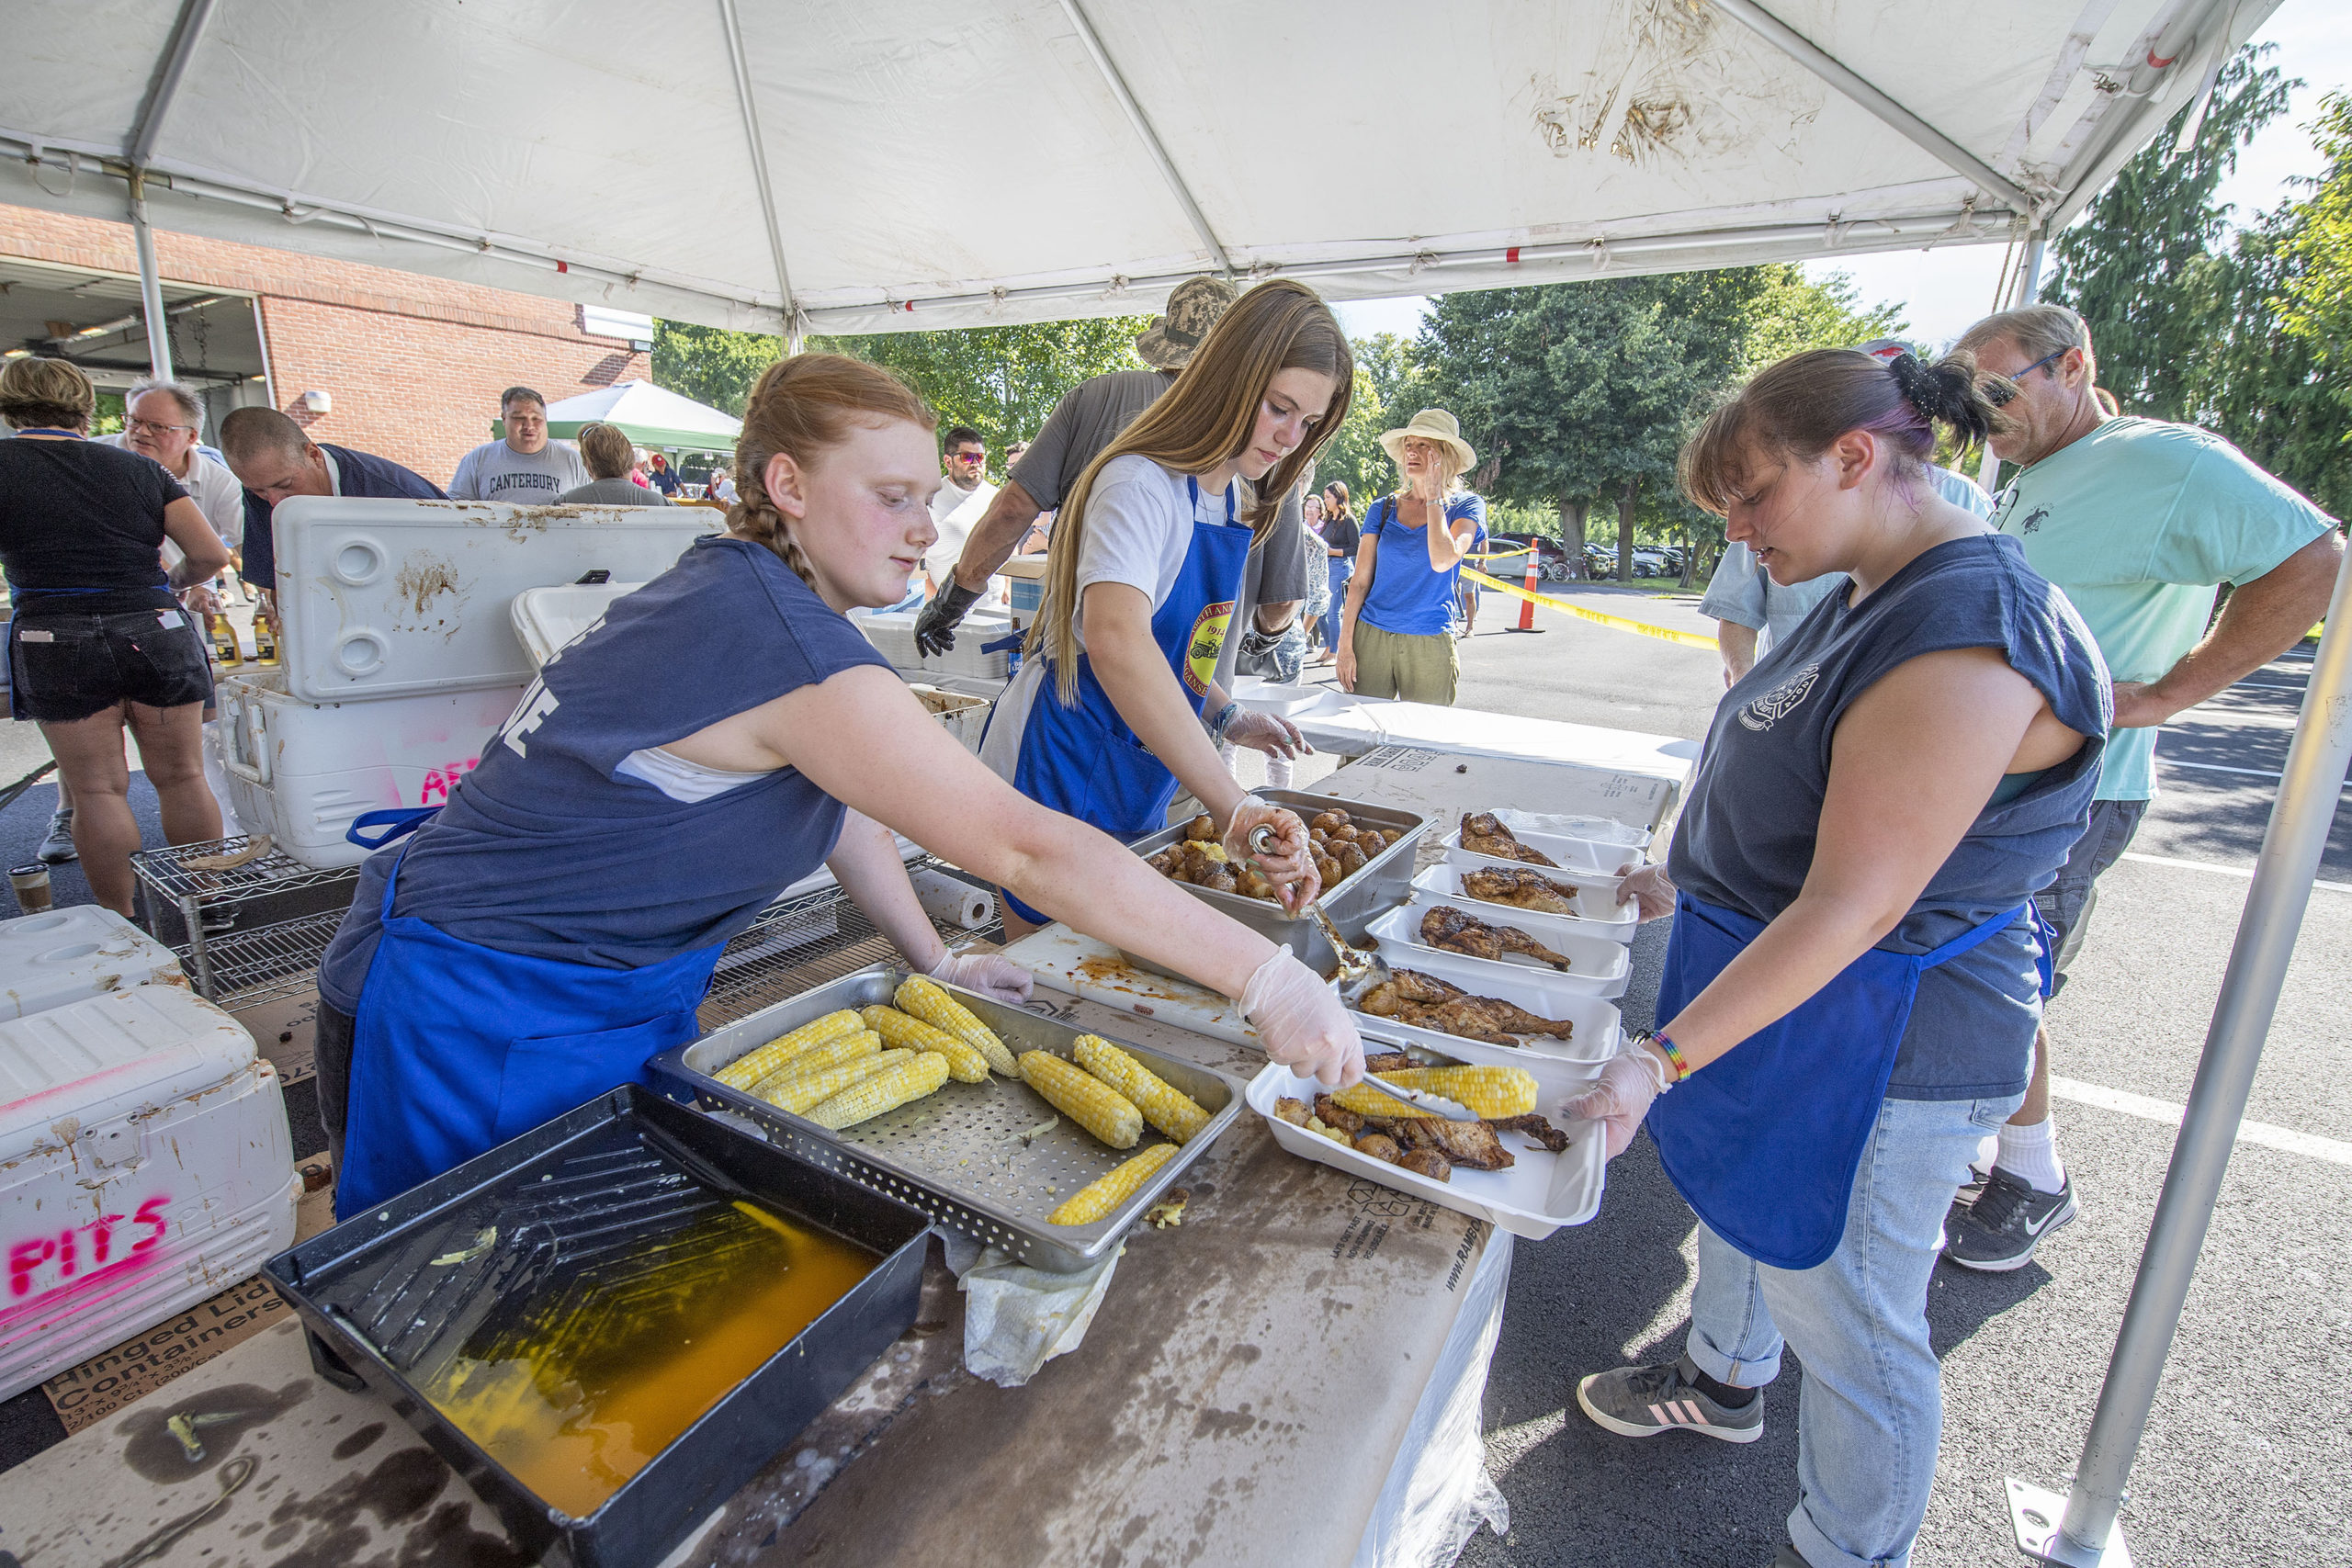 Fresh local corn-on-the-cob was part of the serving during the annual Amagansett Fire Department Chicken Bar-b-que fundraiser on Sunday afternoon.  MICHAEL HELLER